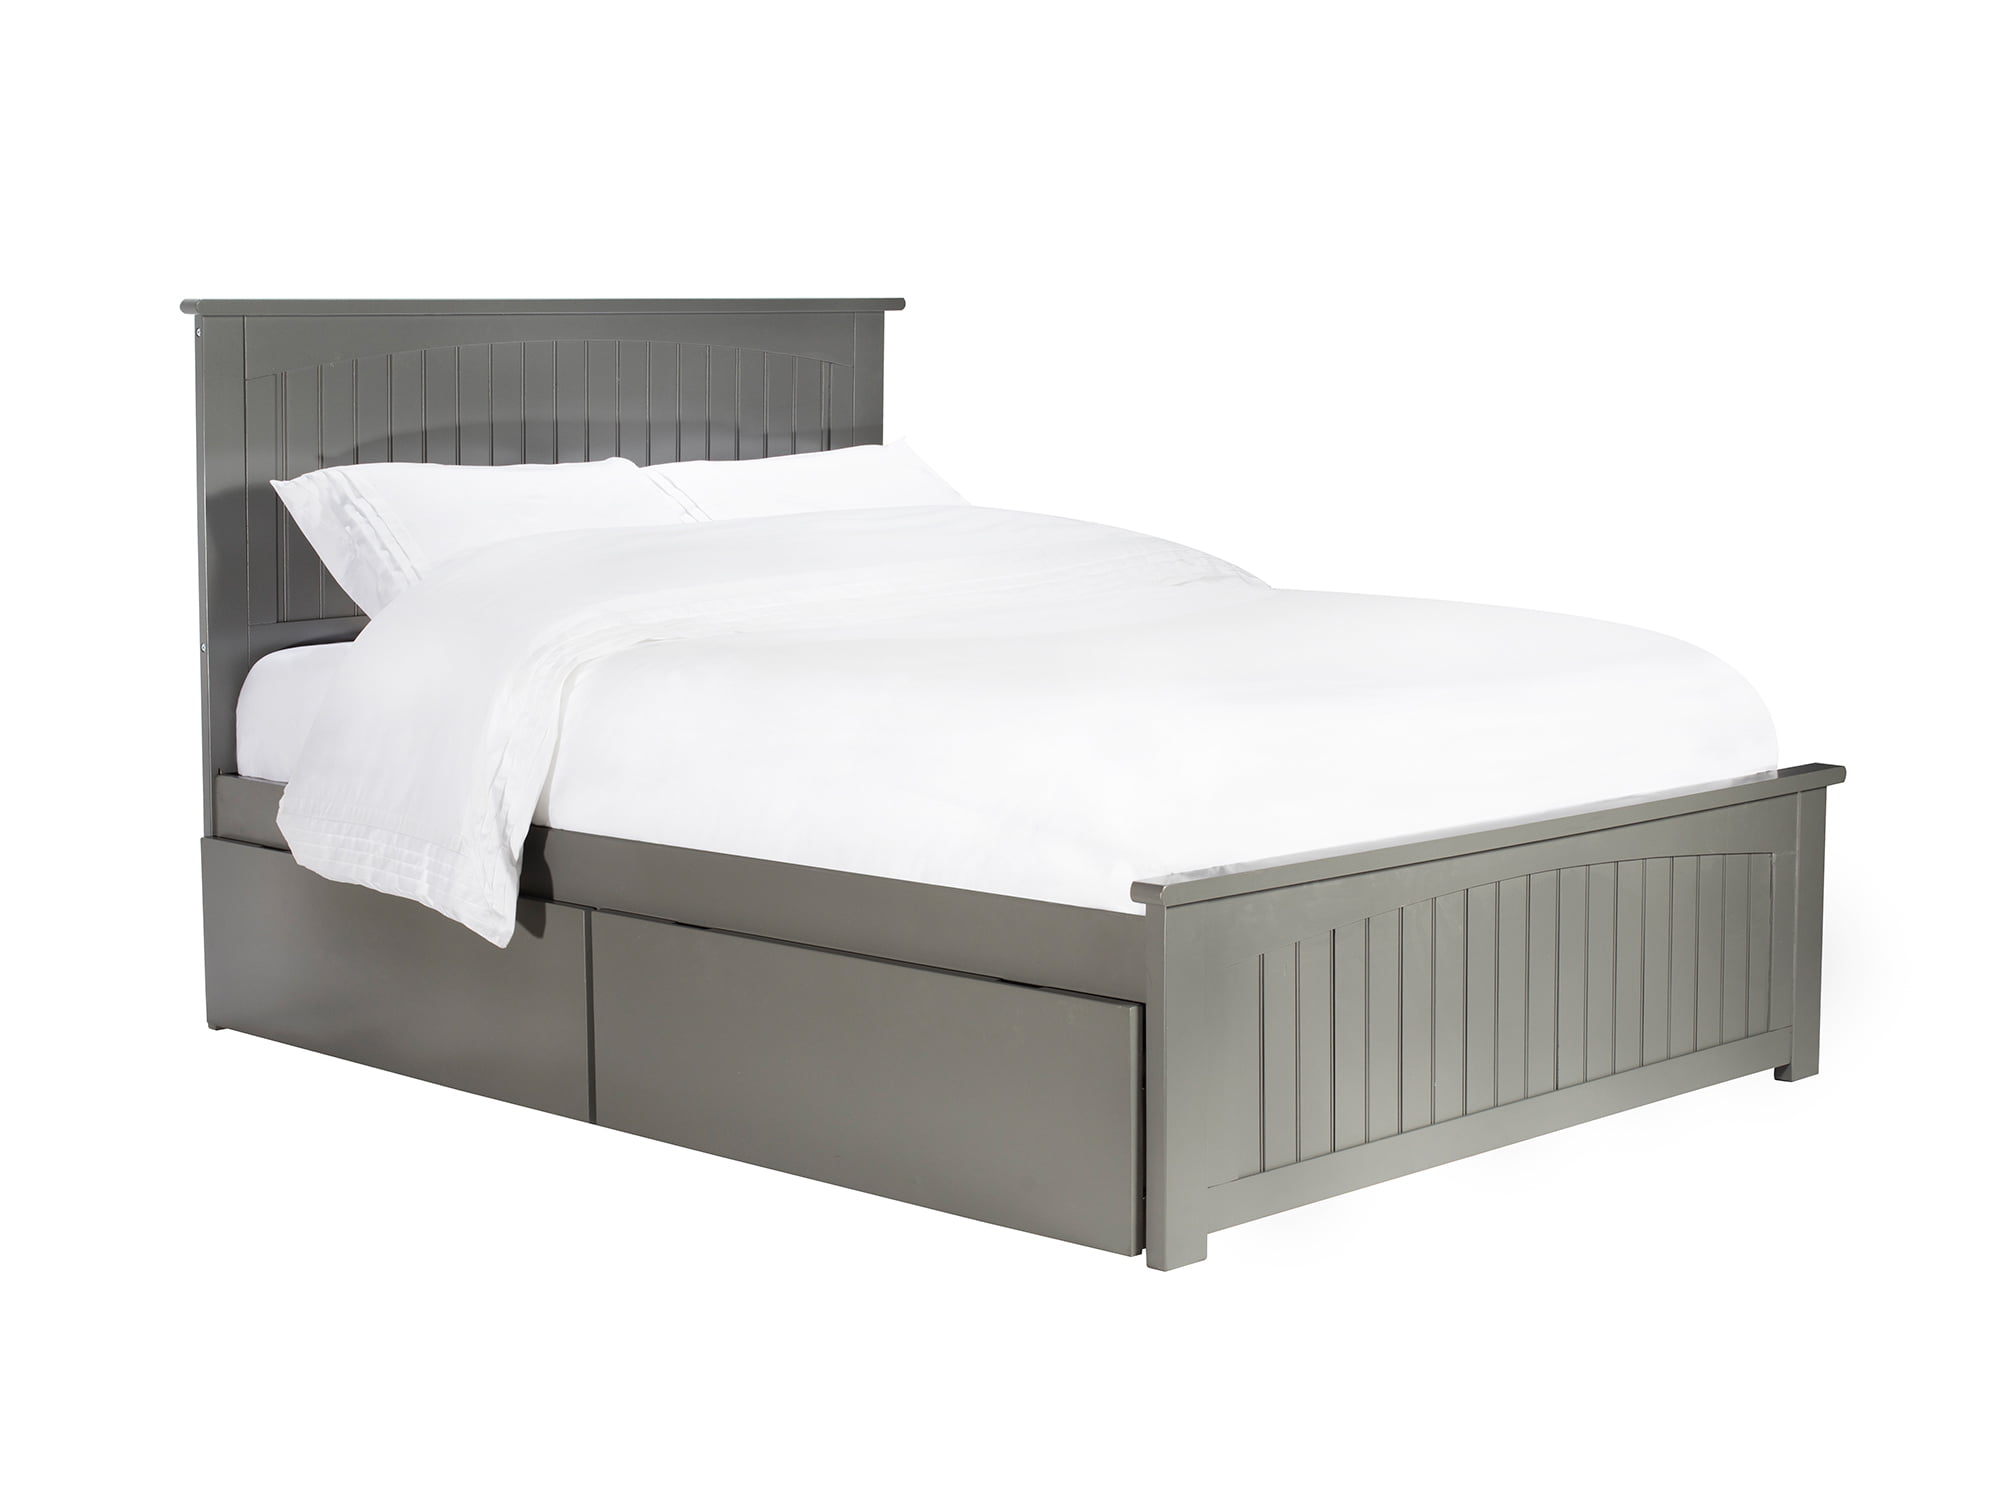 Picture of Atlantic Furniture AR8246119 Nantucket Queen Platform Bed with Matching Foot Board with 2 Urban Bed Drawers - Grey